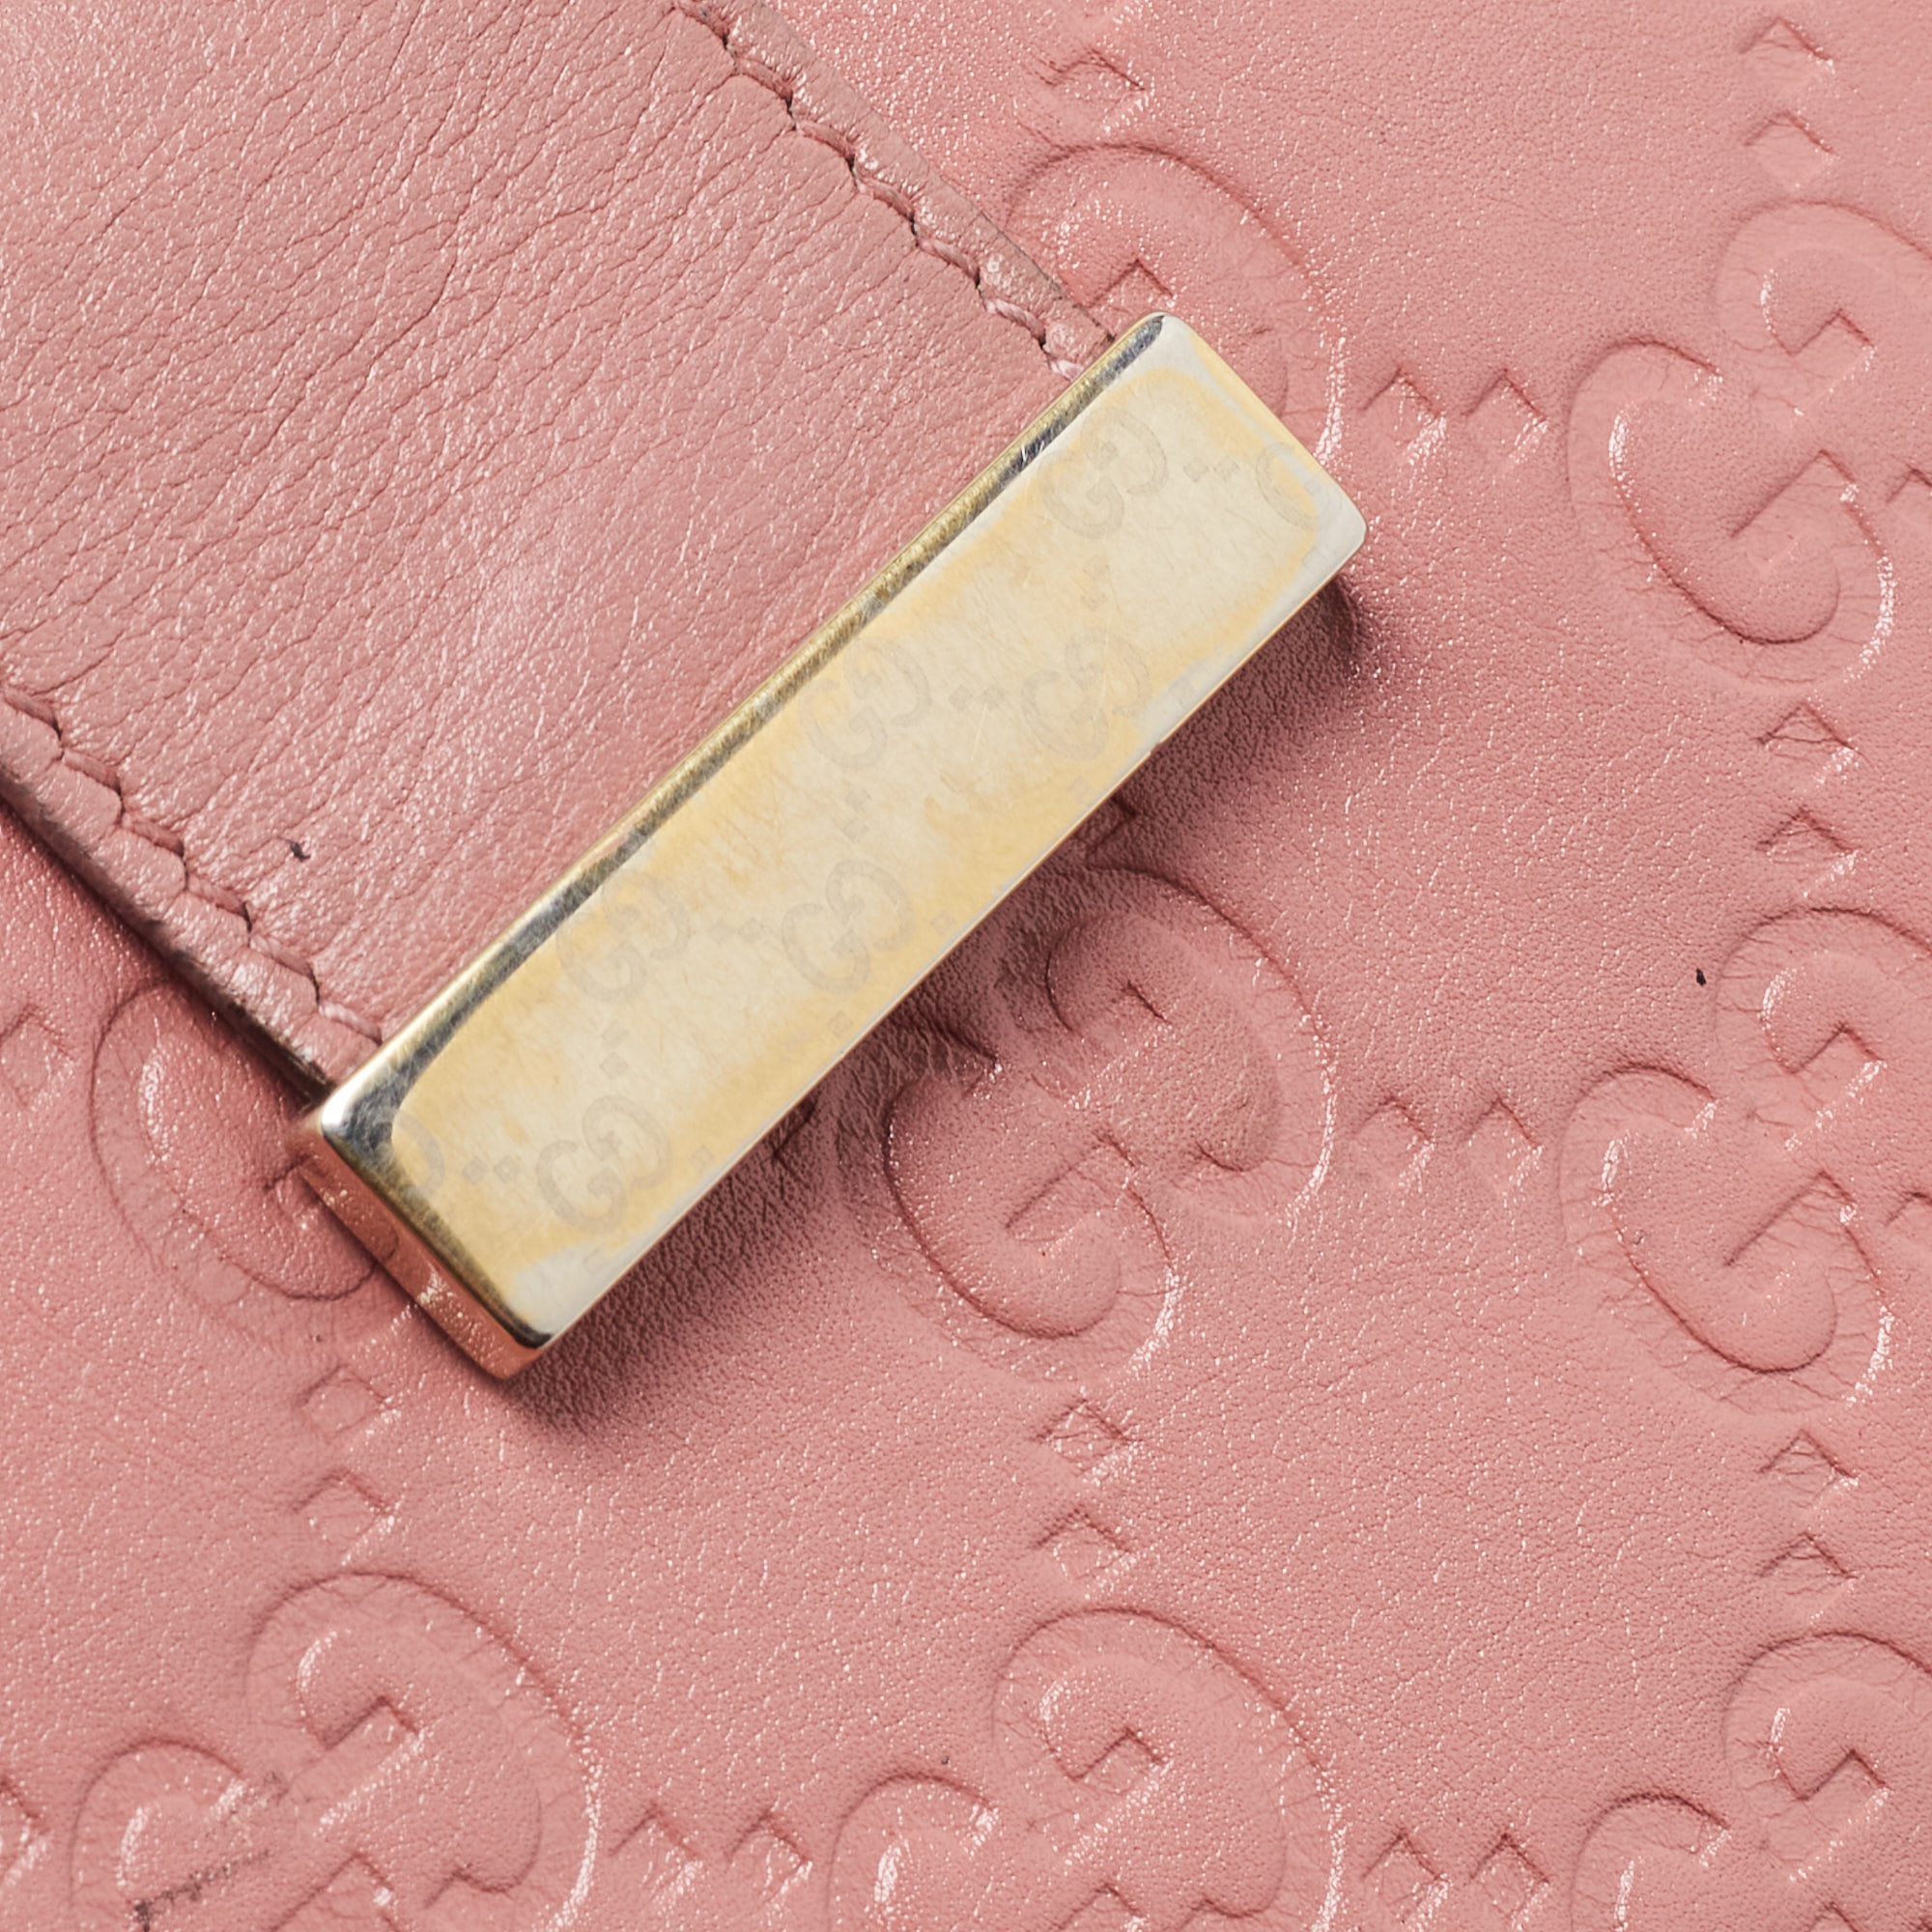 Gucci Pink Guccissima Leather Metal Flap Continental Wallet